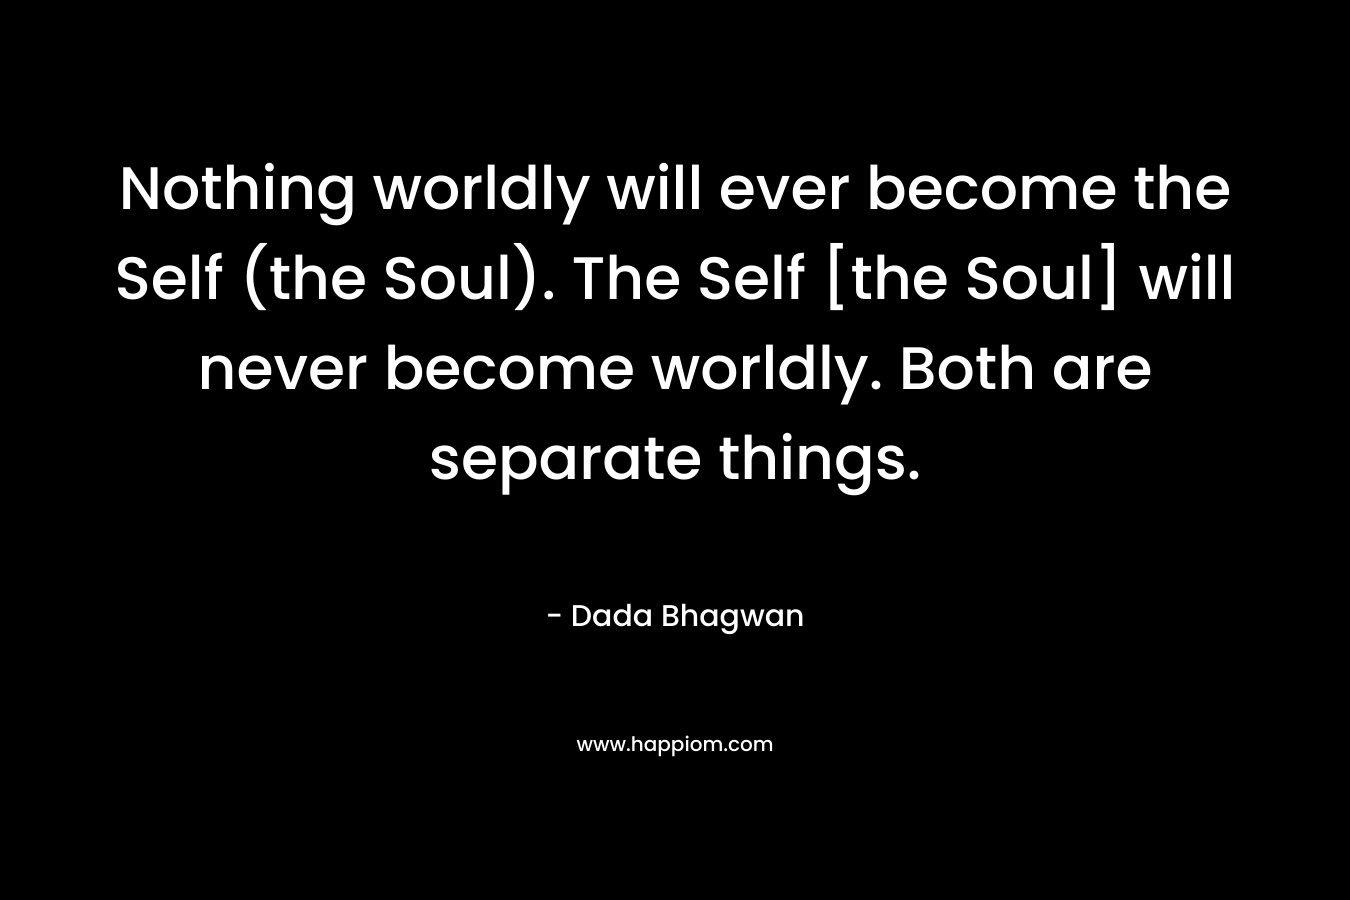 Nothing worldly will ever become the Self (the Soul). The Self [the Soul] will never become worldly. Both are separate things.